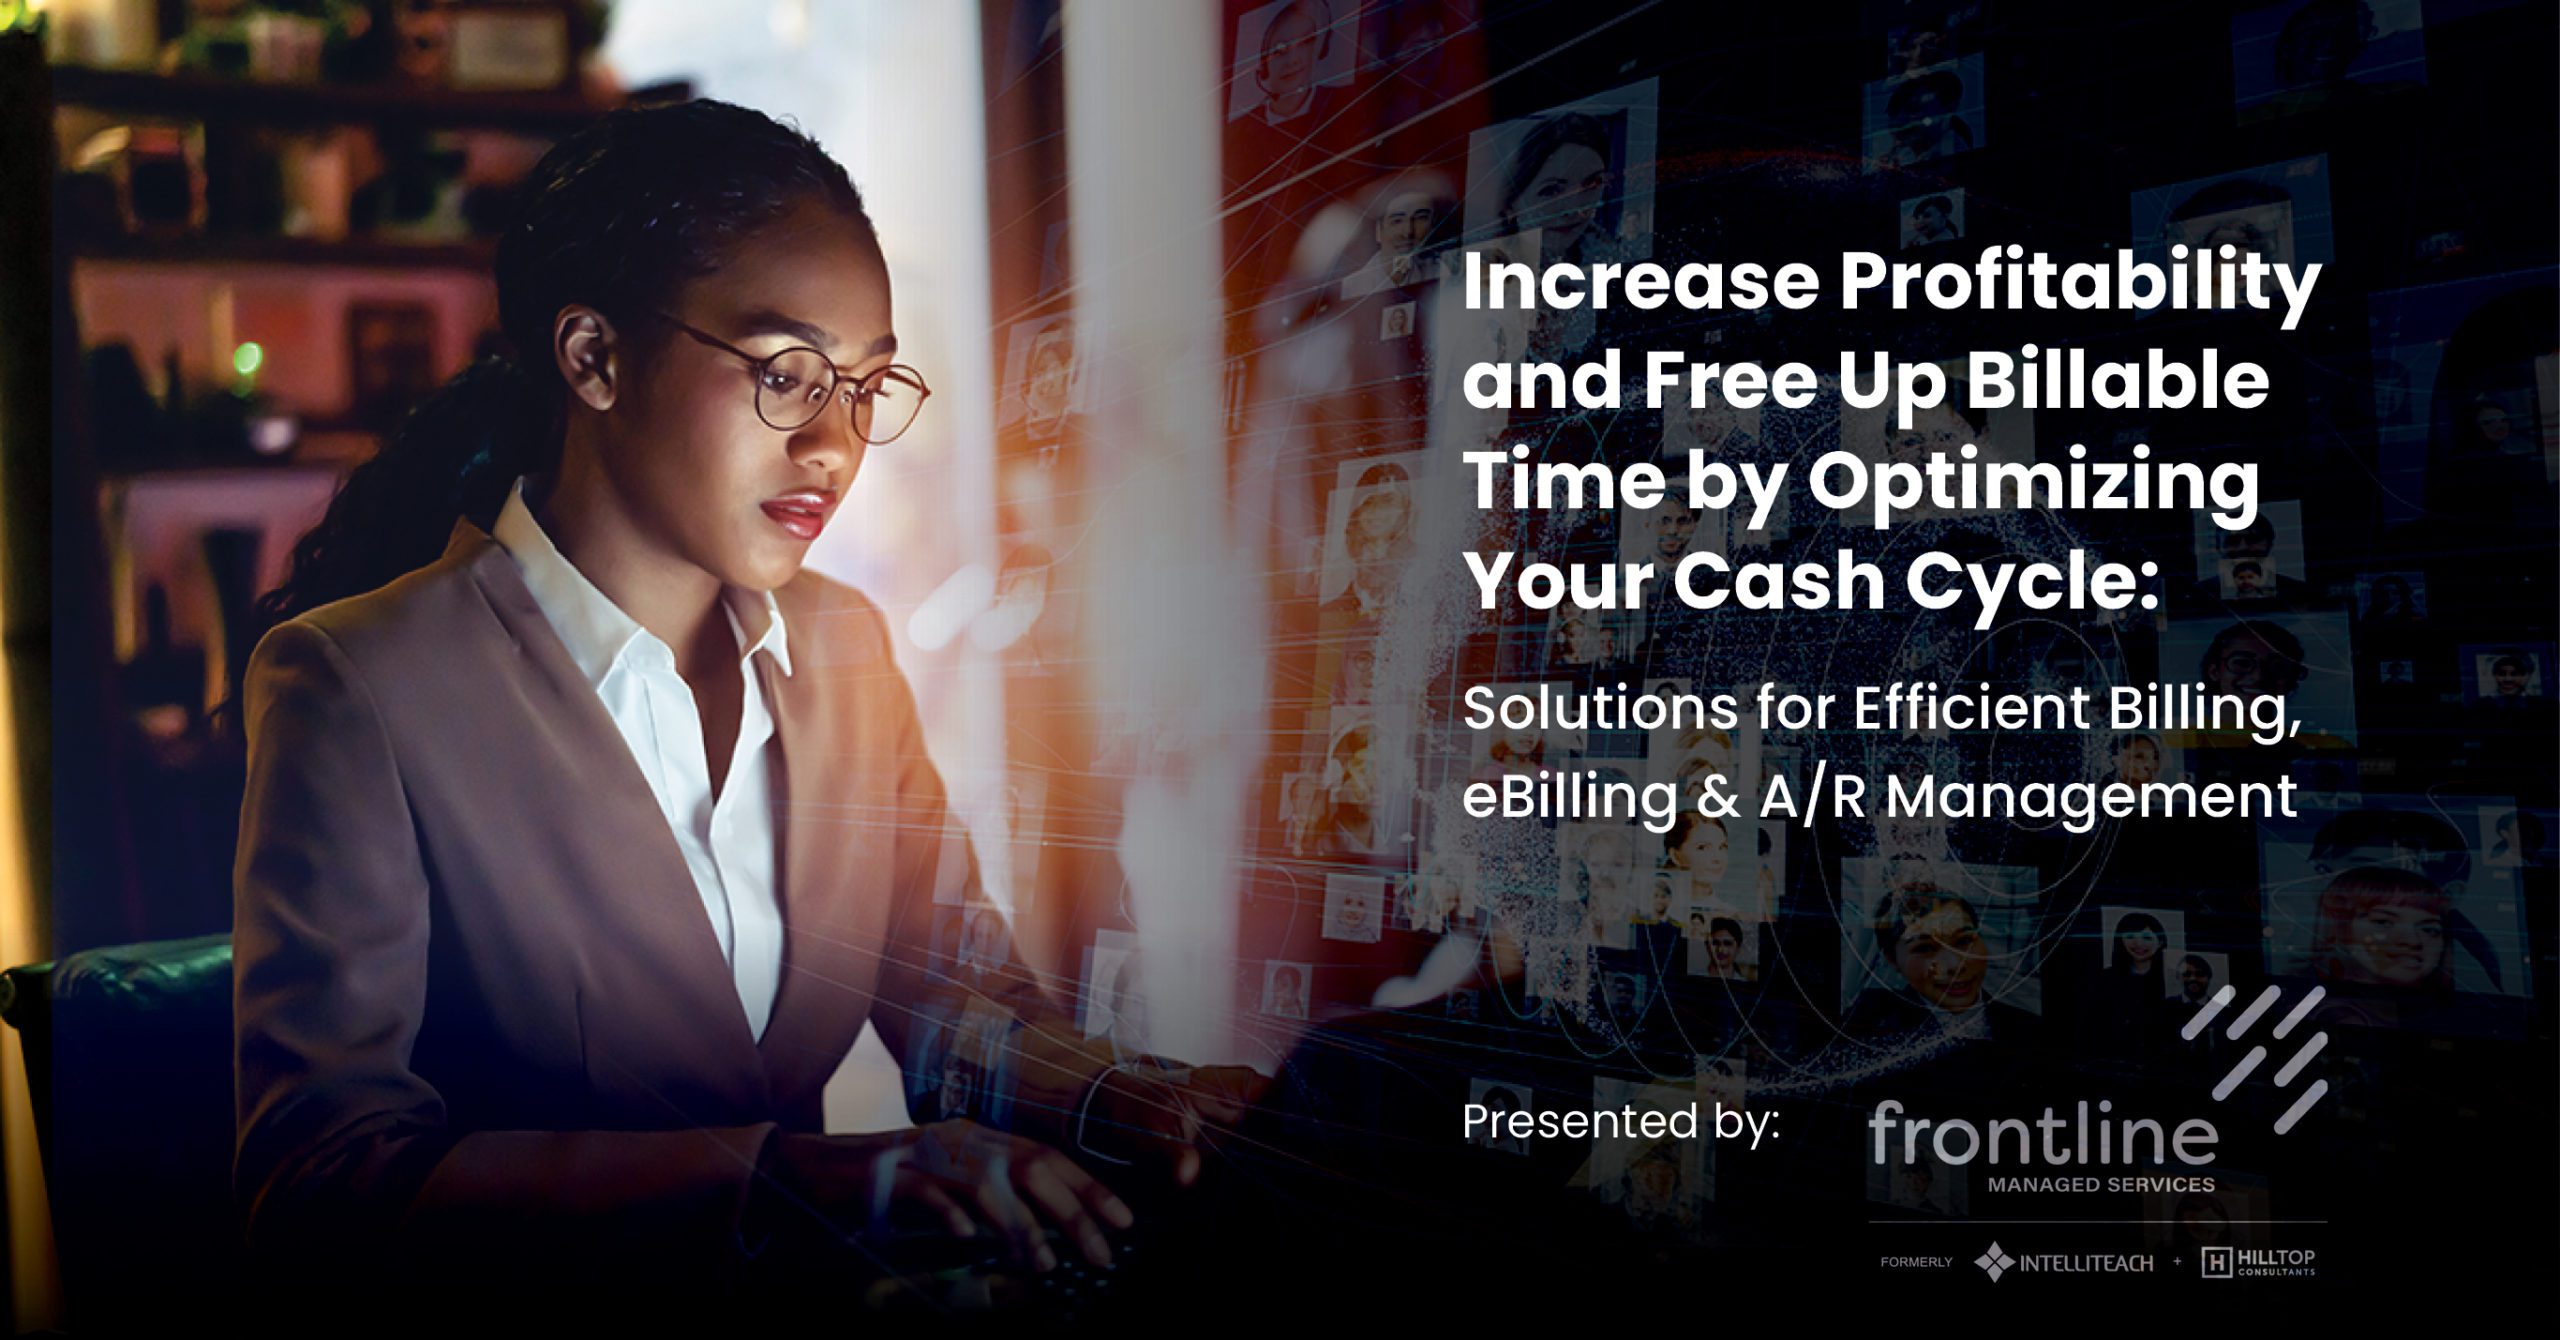 Increasing Profit and optimizing your cash cycle